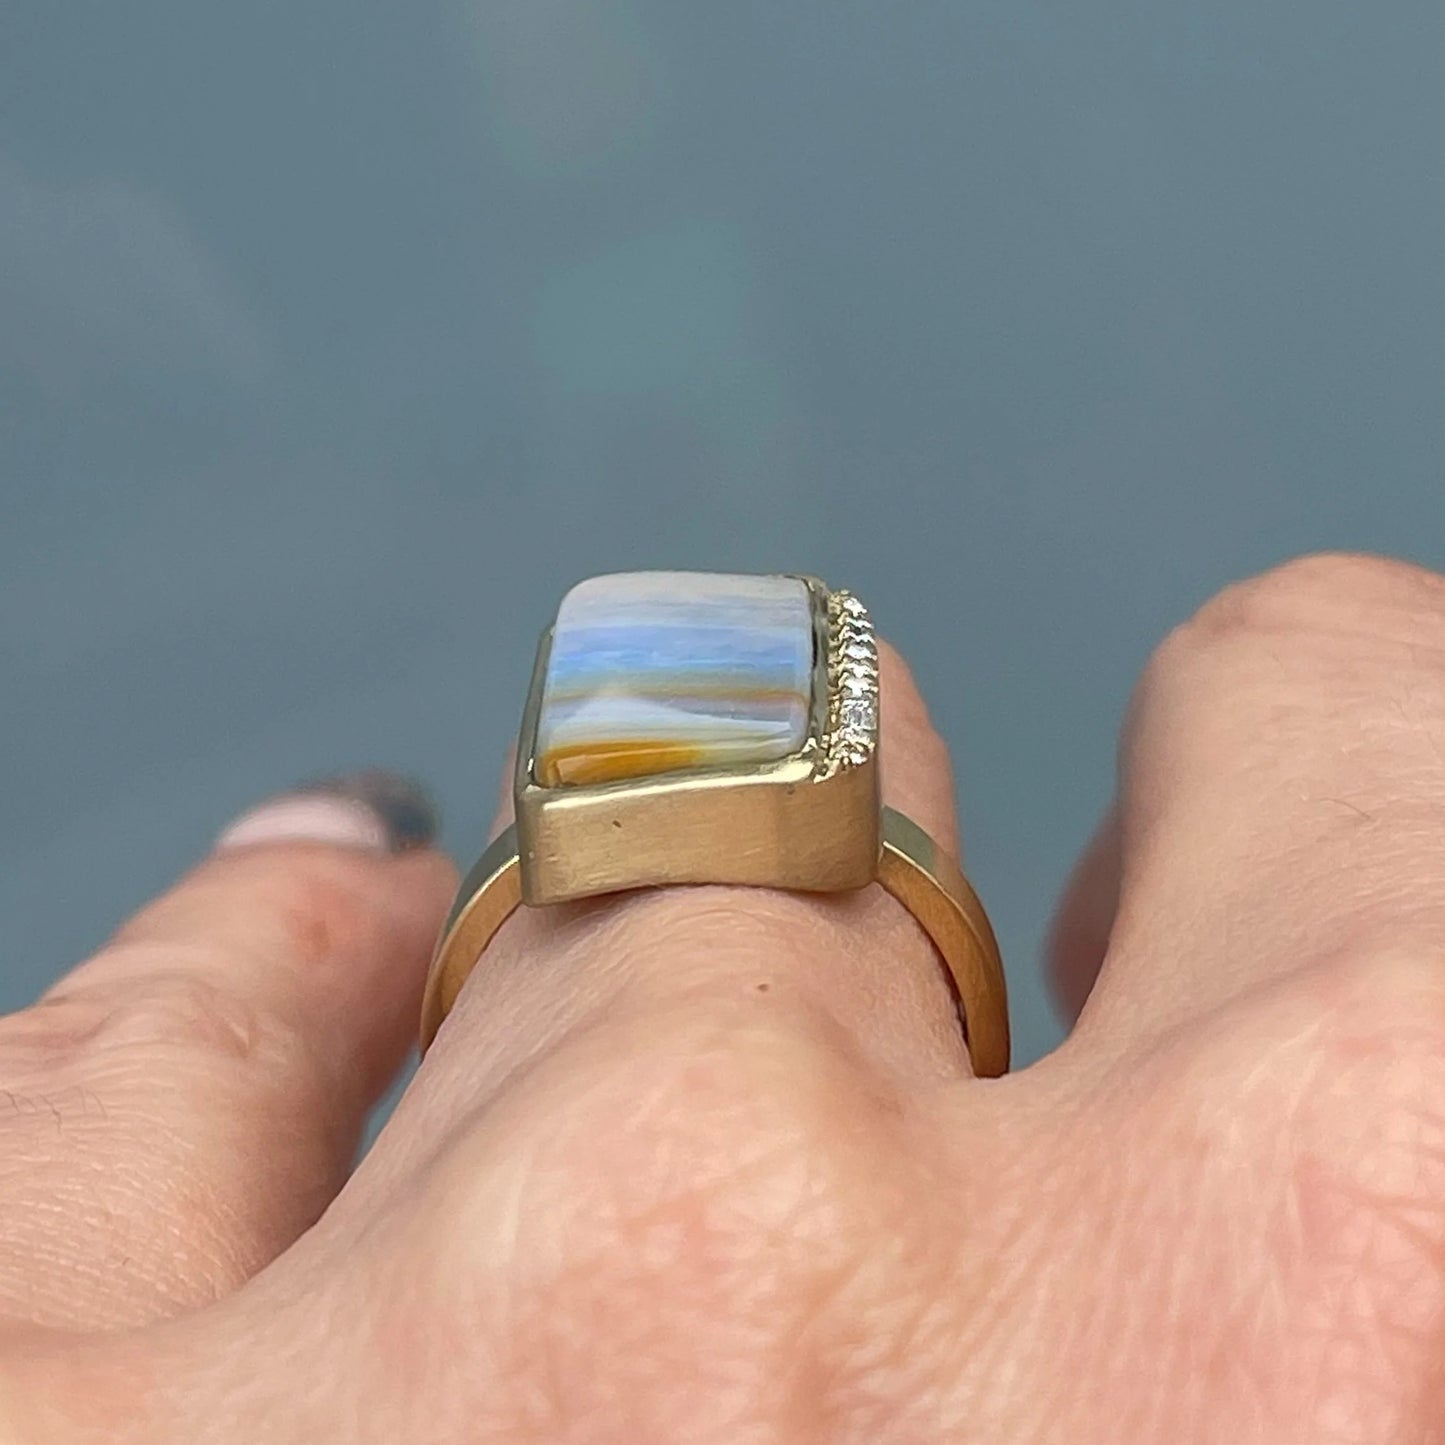 An Australian Opal Ring by NIXIN Jewelry modeled on the hand and shot to show the height of the ring when worn on the finger.